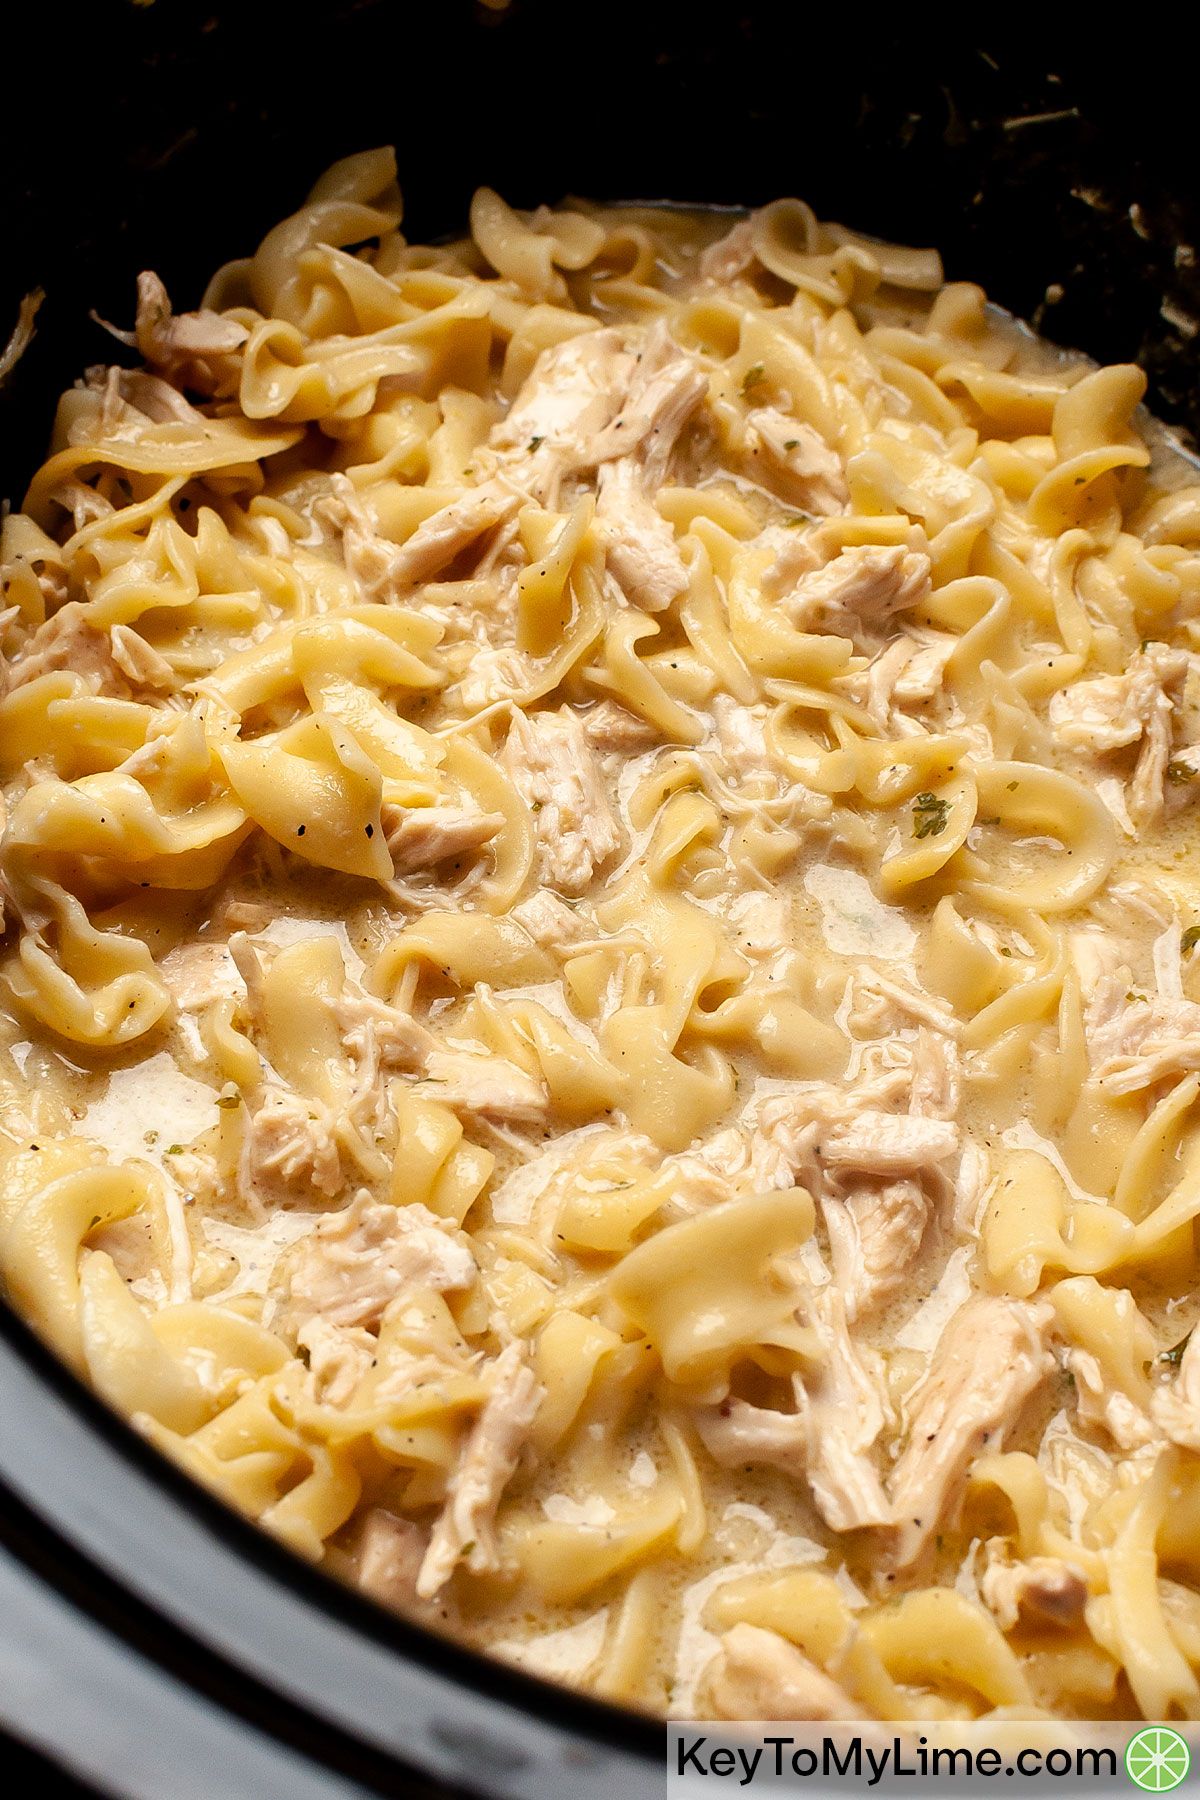 A close up image of the texture of chicken and noodles.